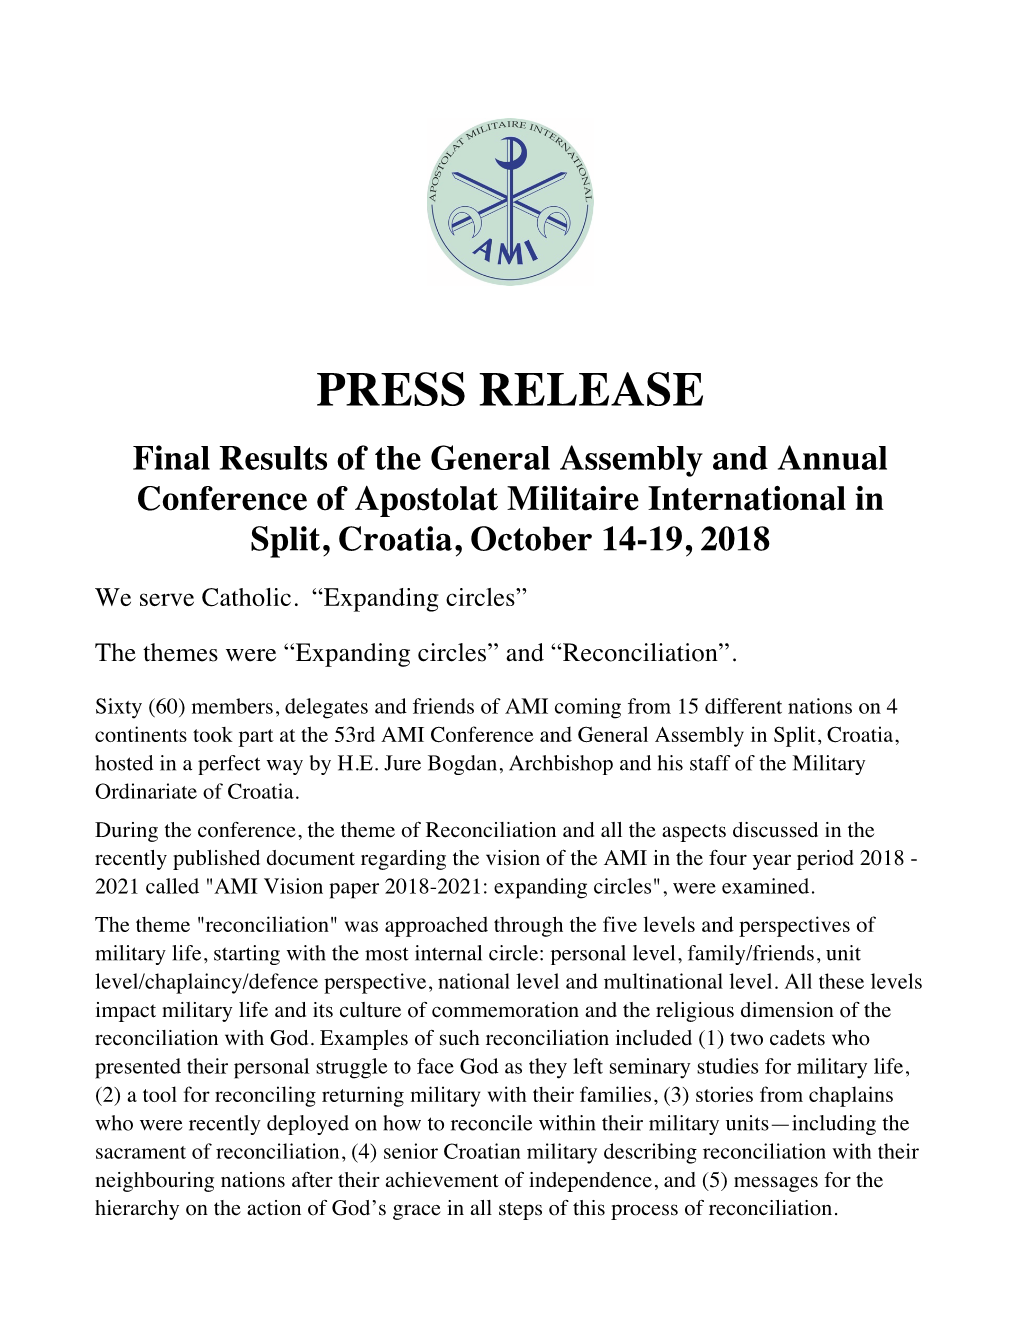 PRESS RELEASE Final Results of the General Assembly and Annual Conference of Apostolat Militaire International in Split, Croatia, October 14-19, 2018